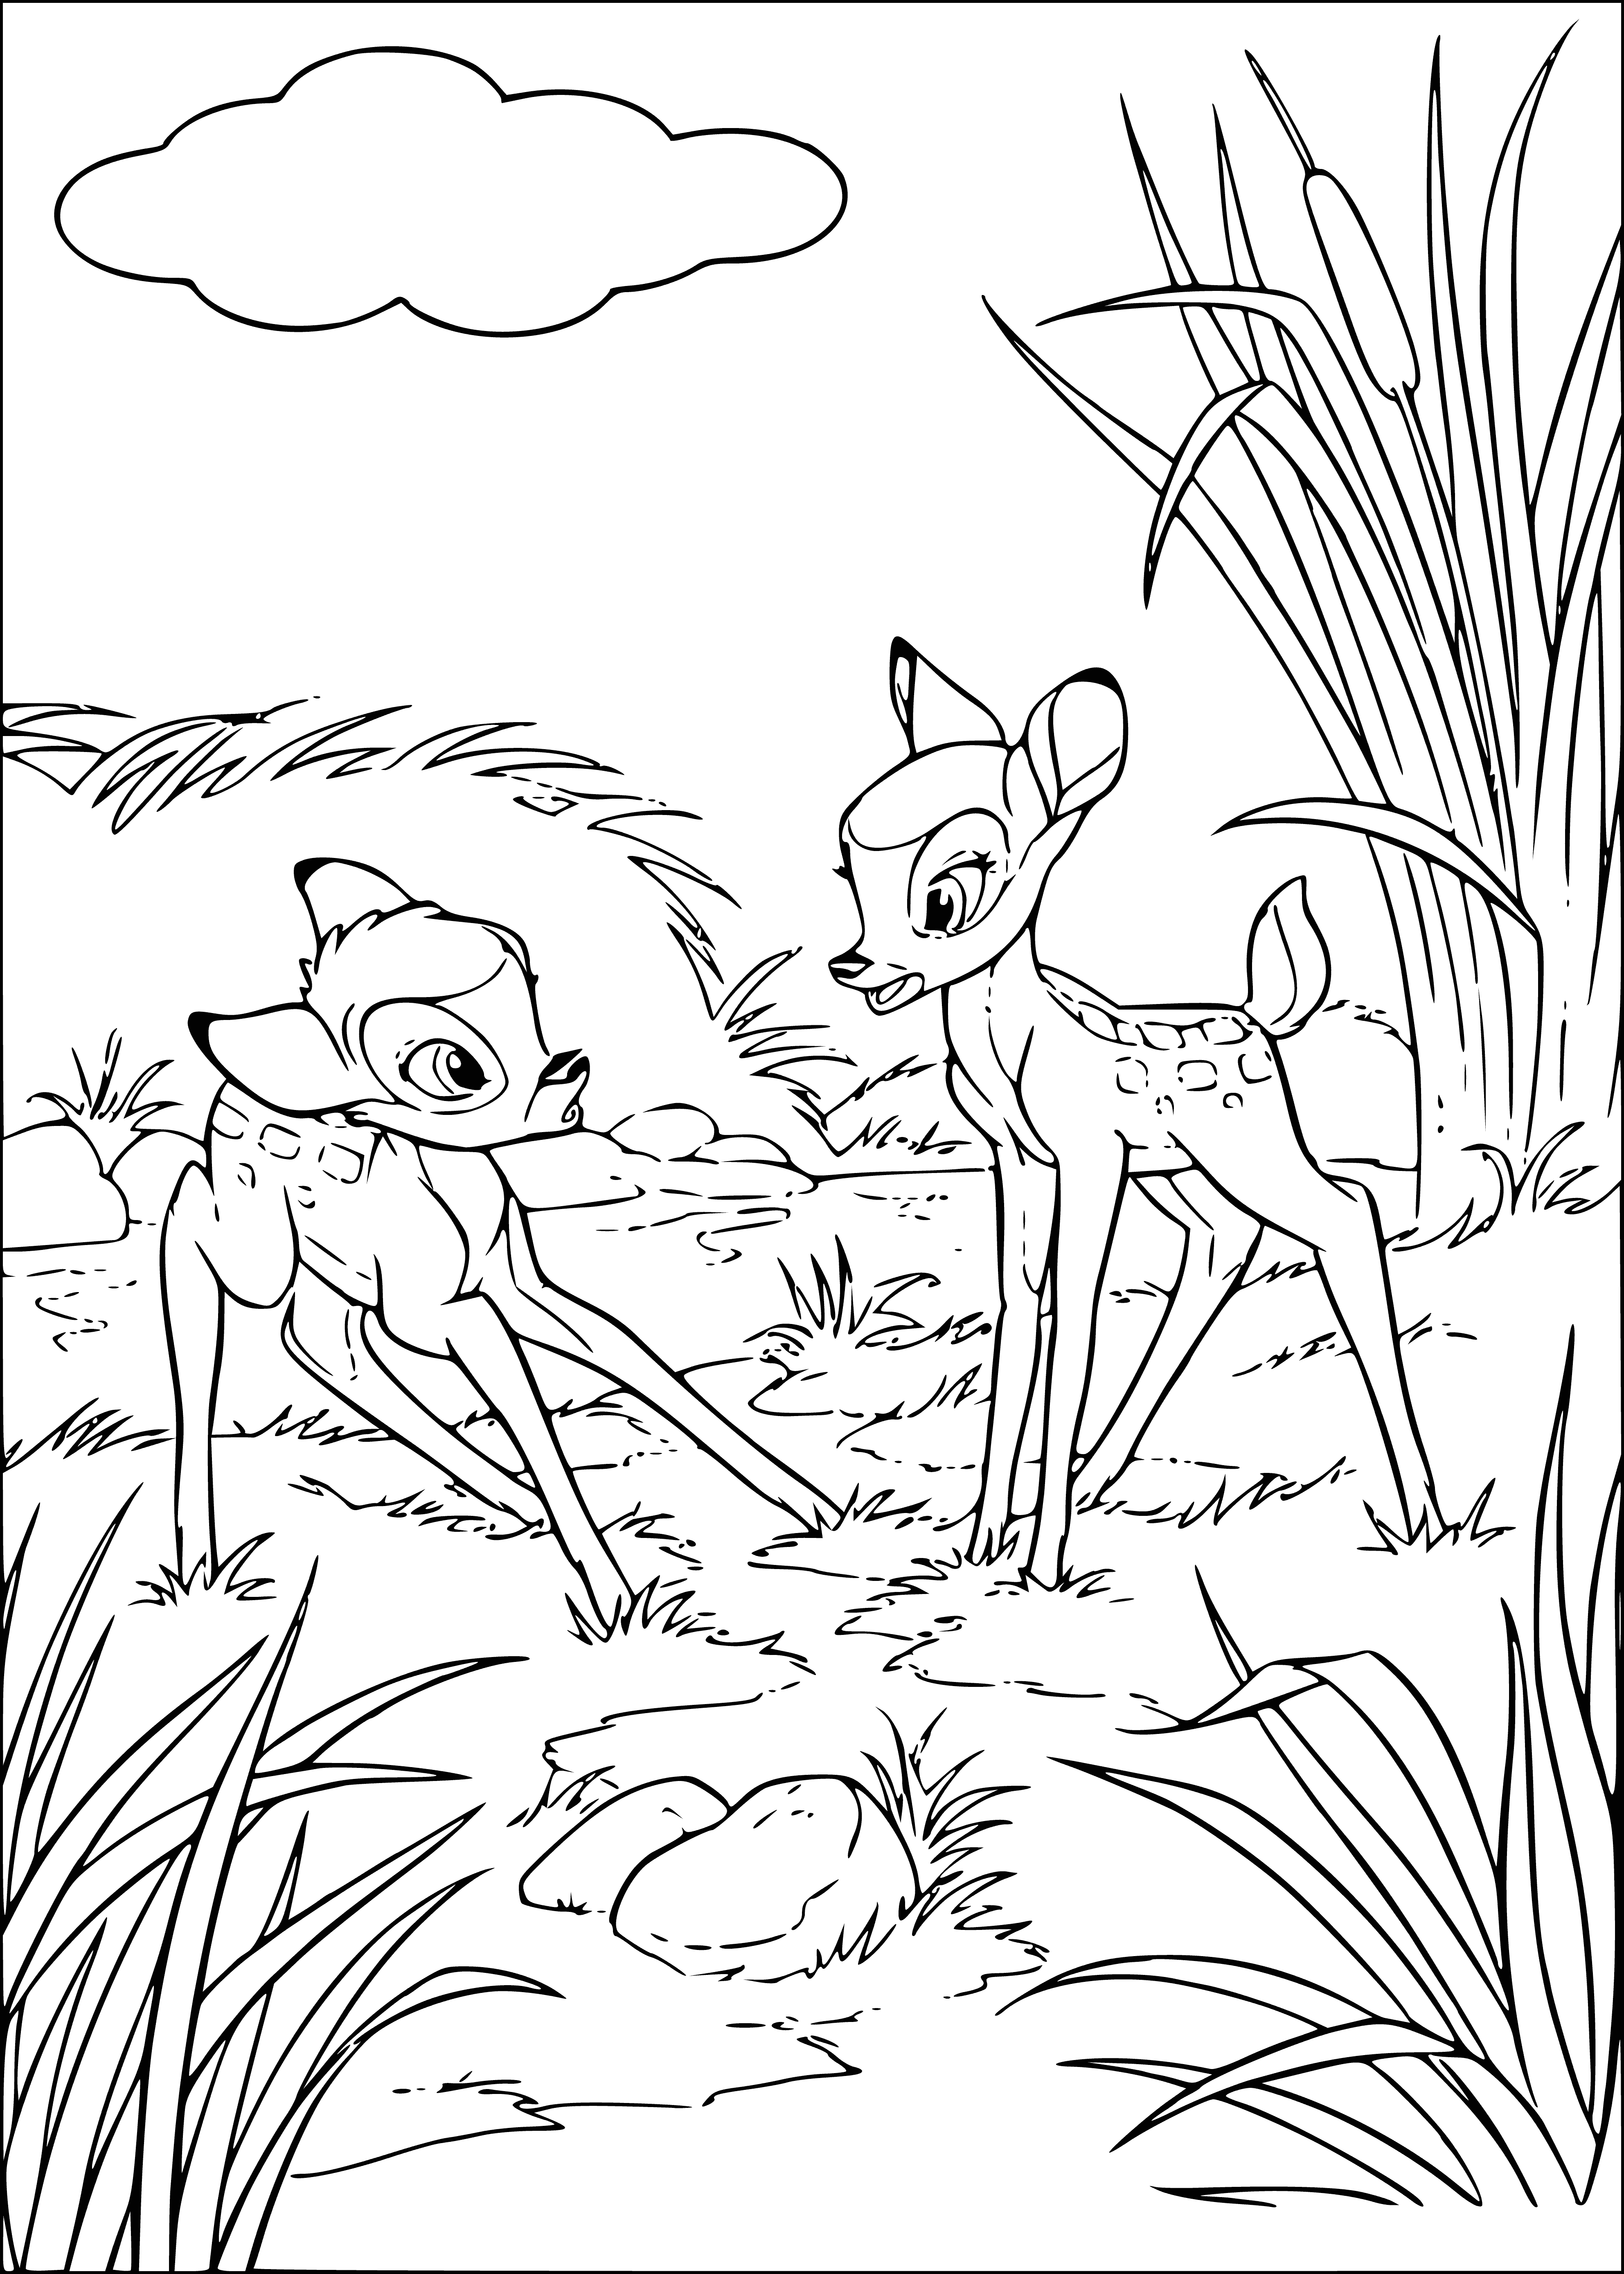 coloring page: Fawn and bird share a peaceful moment on the forest floor—the fawn resting and the bird looking down with its head tilted.